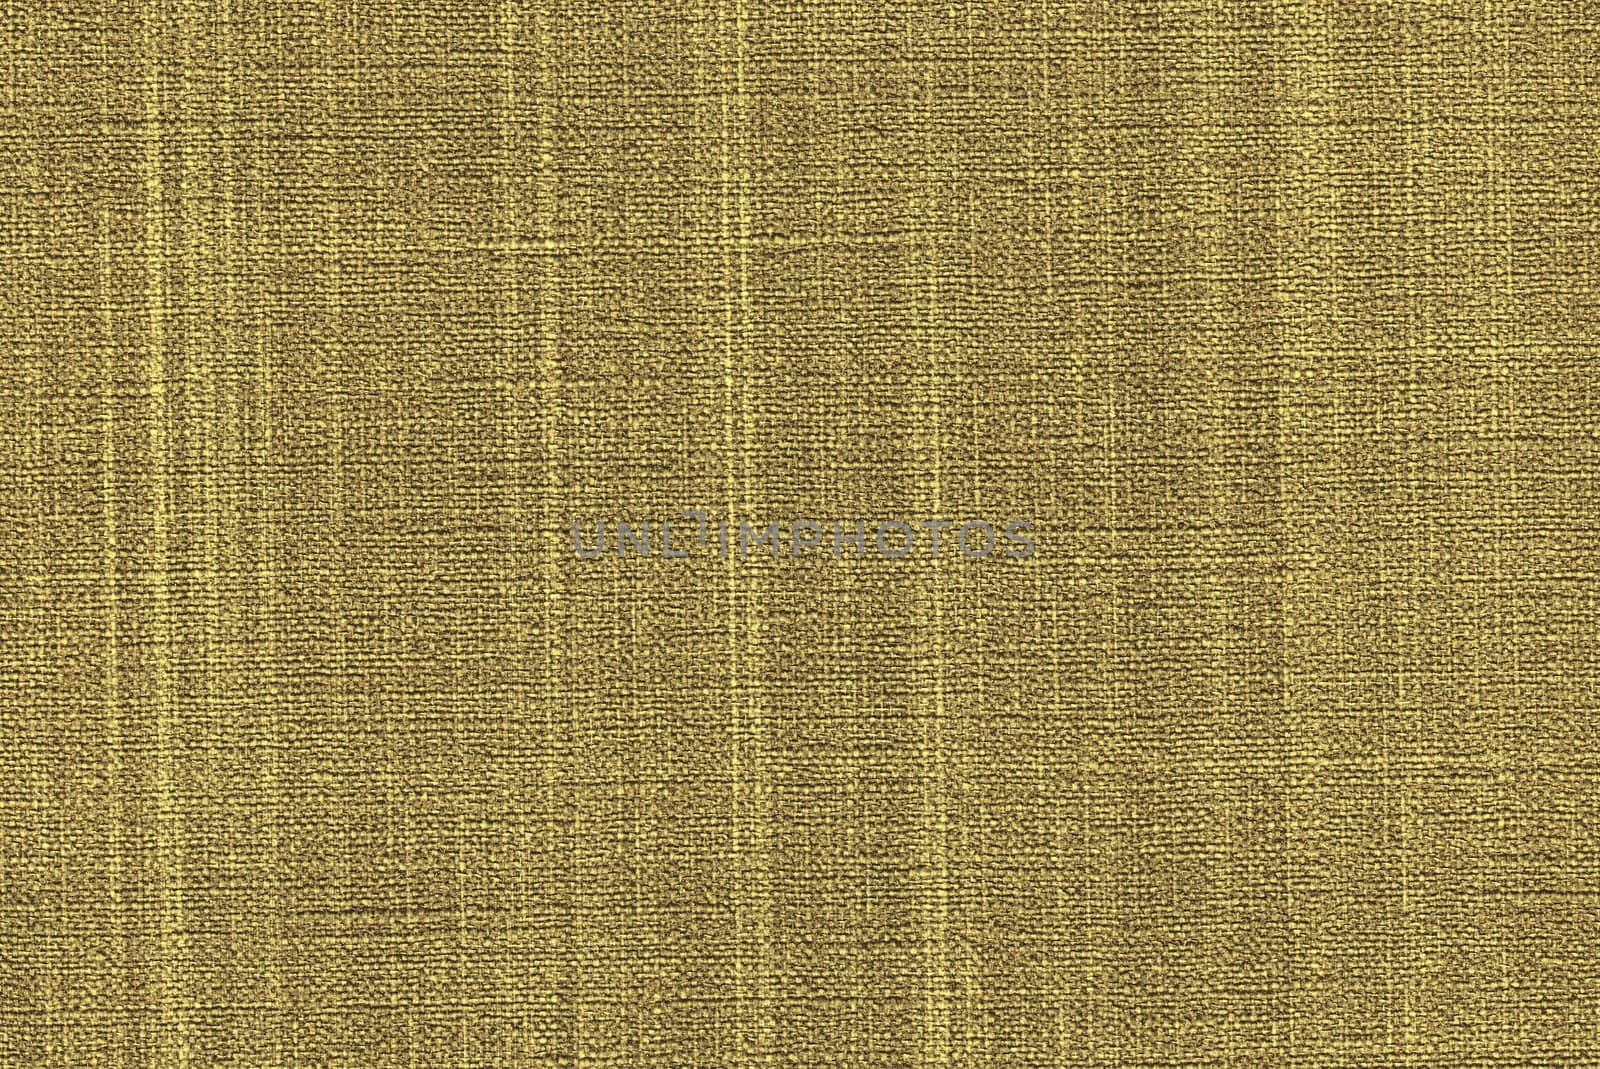 fabric texture (high res.) by mg1408